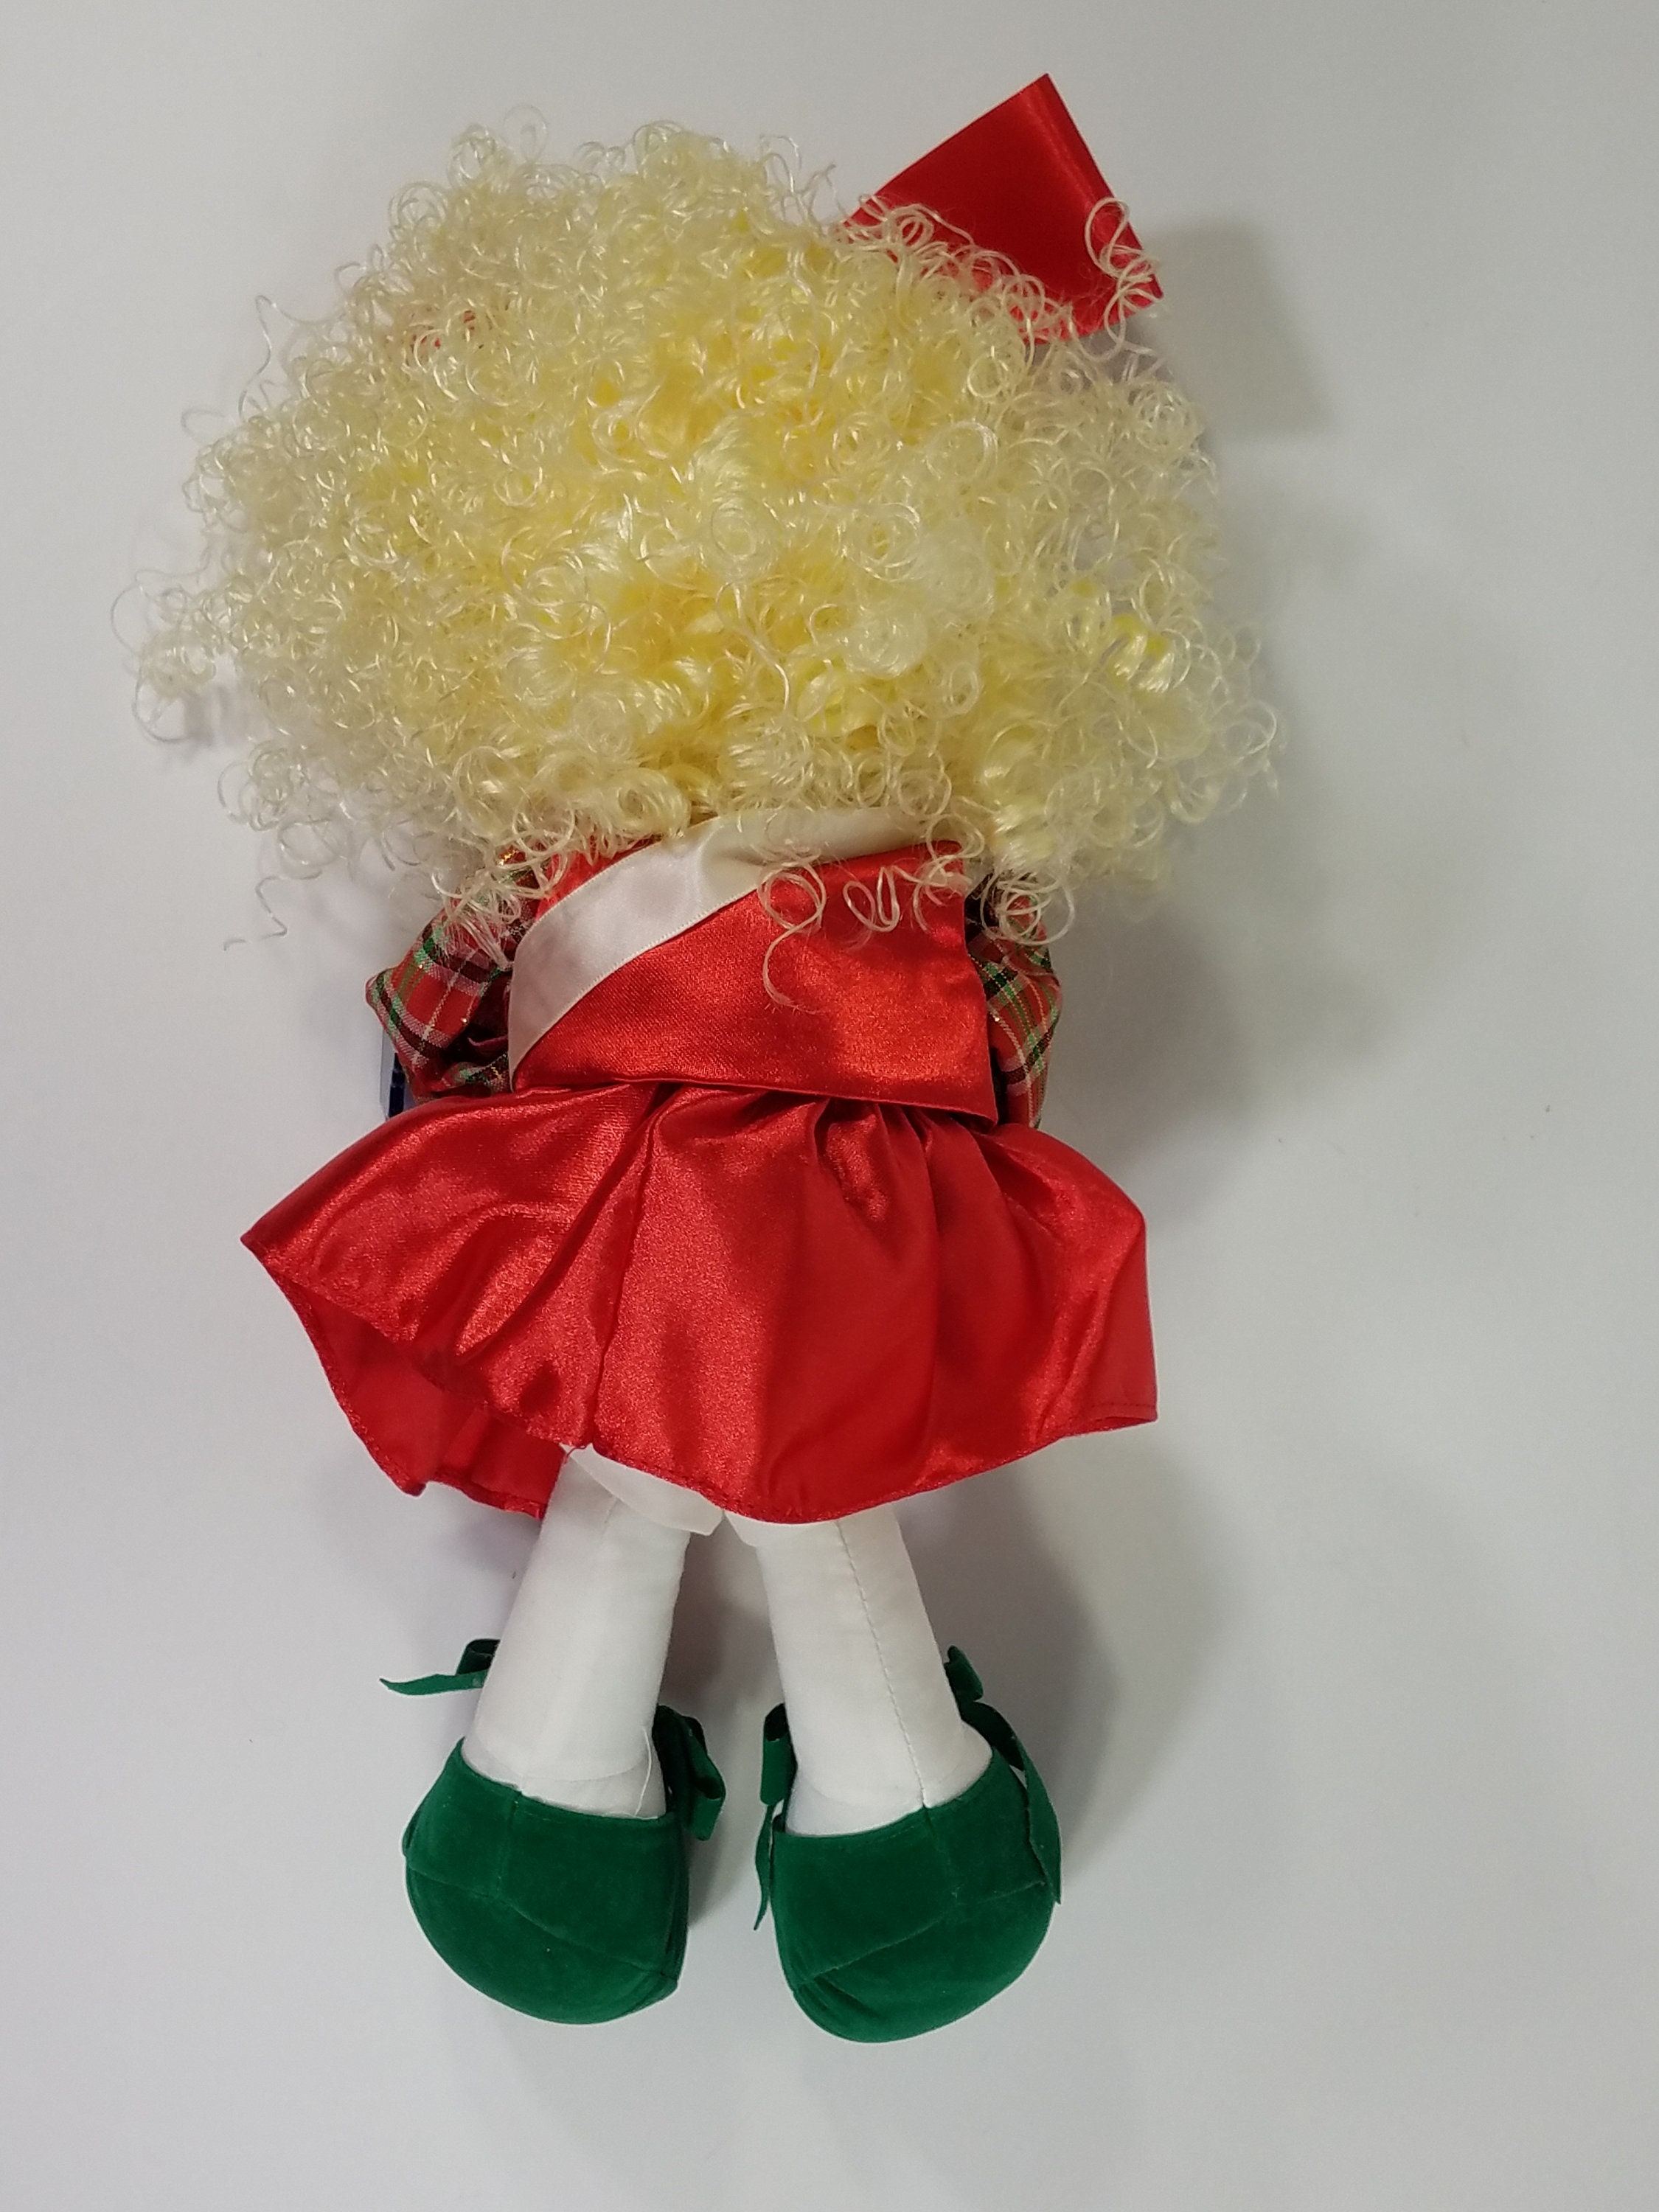 Applause Precious Moments Red Christmas Doll Blonde Curly Hair - Etsy